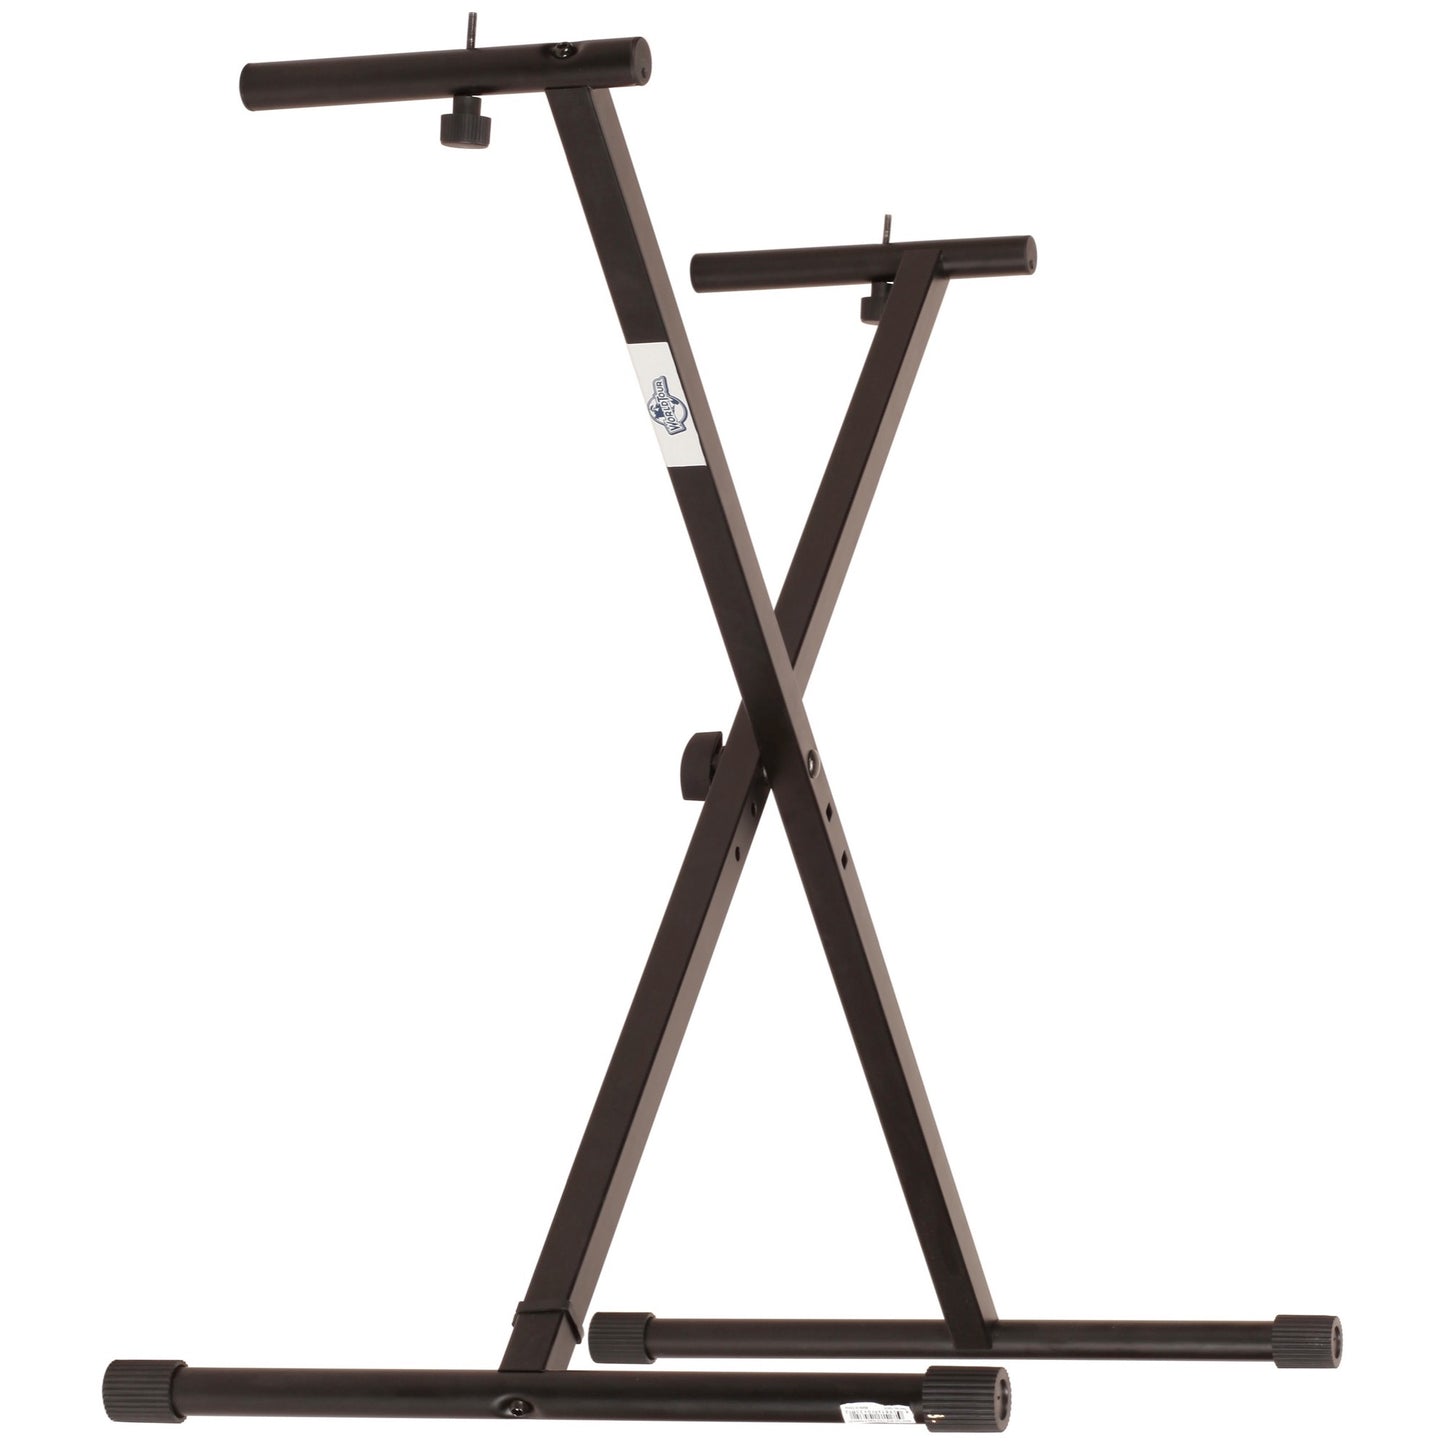 Deluxe Series YX-KS Single X-Style Keyboard Stand, for Yamaha Keyboards